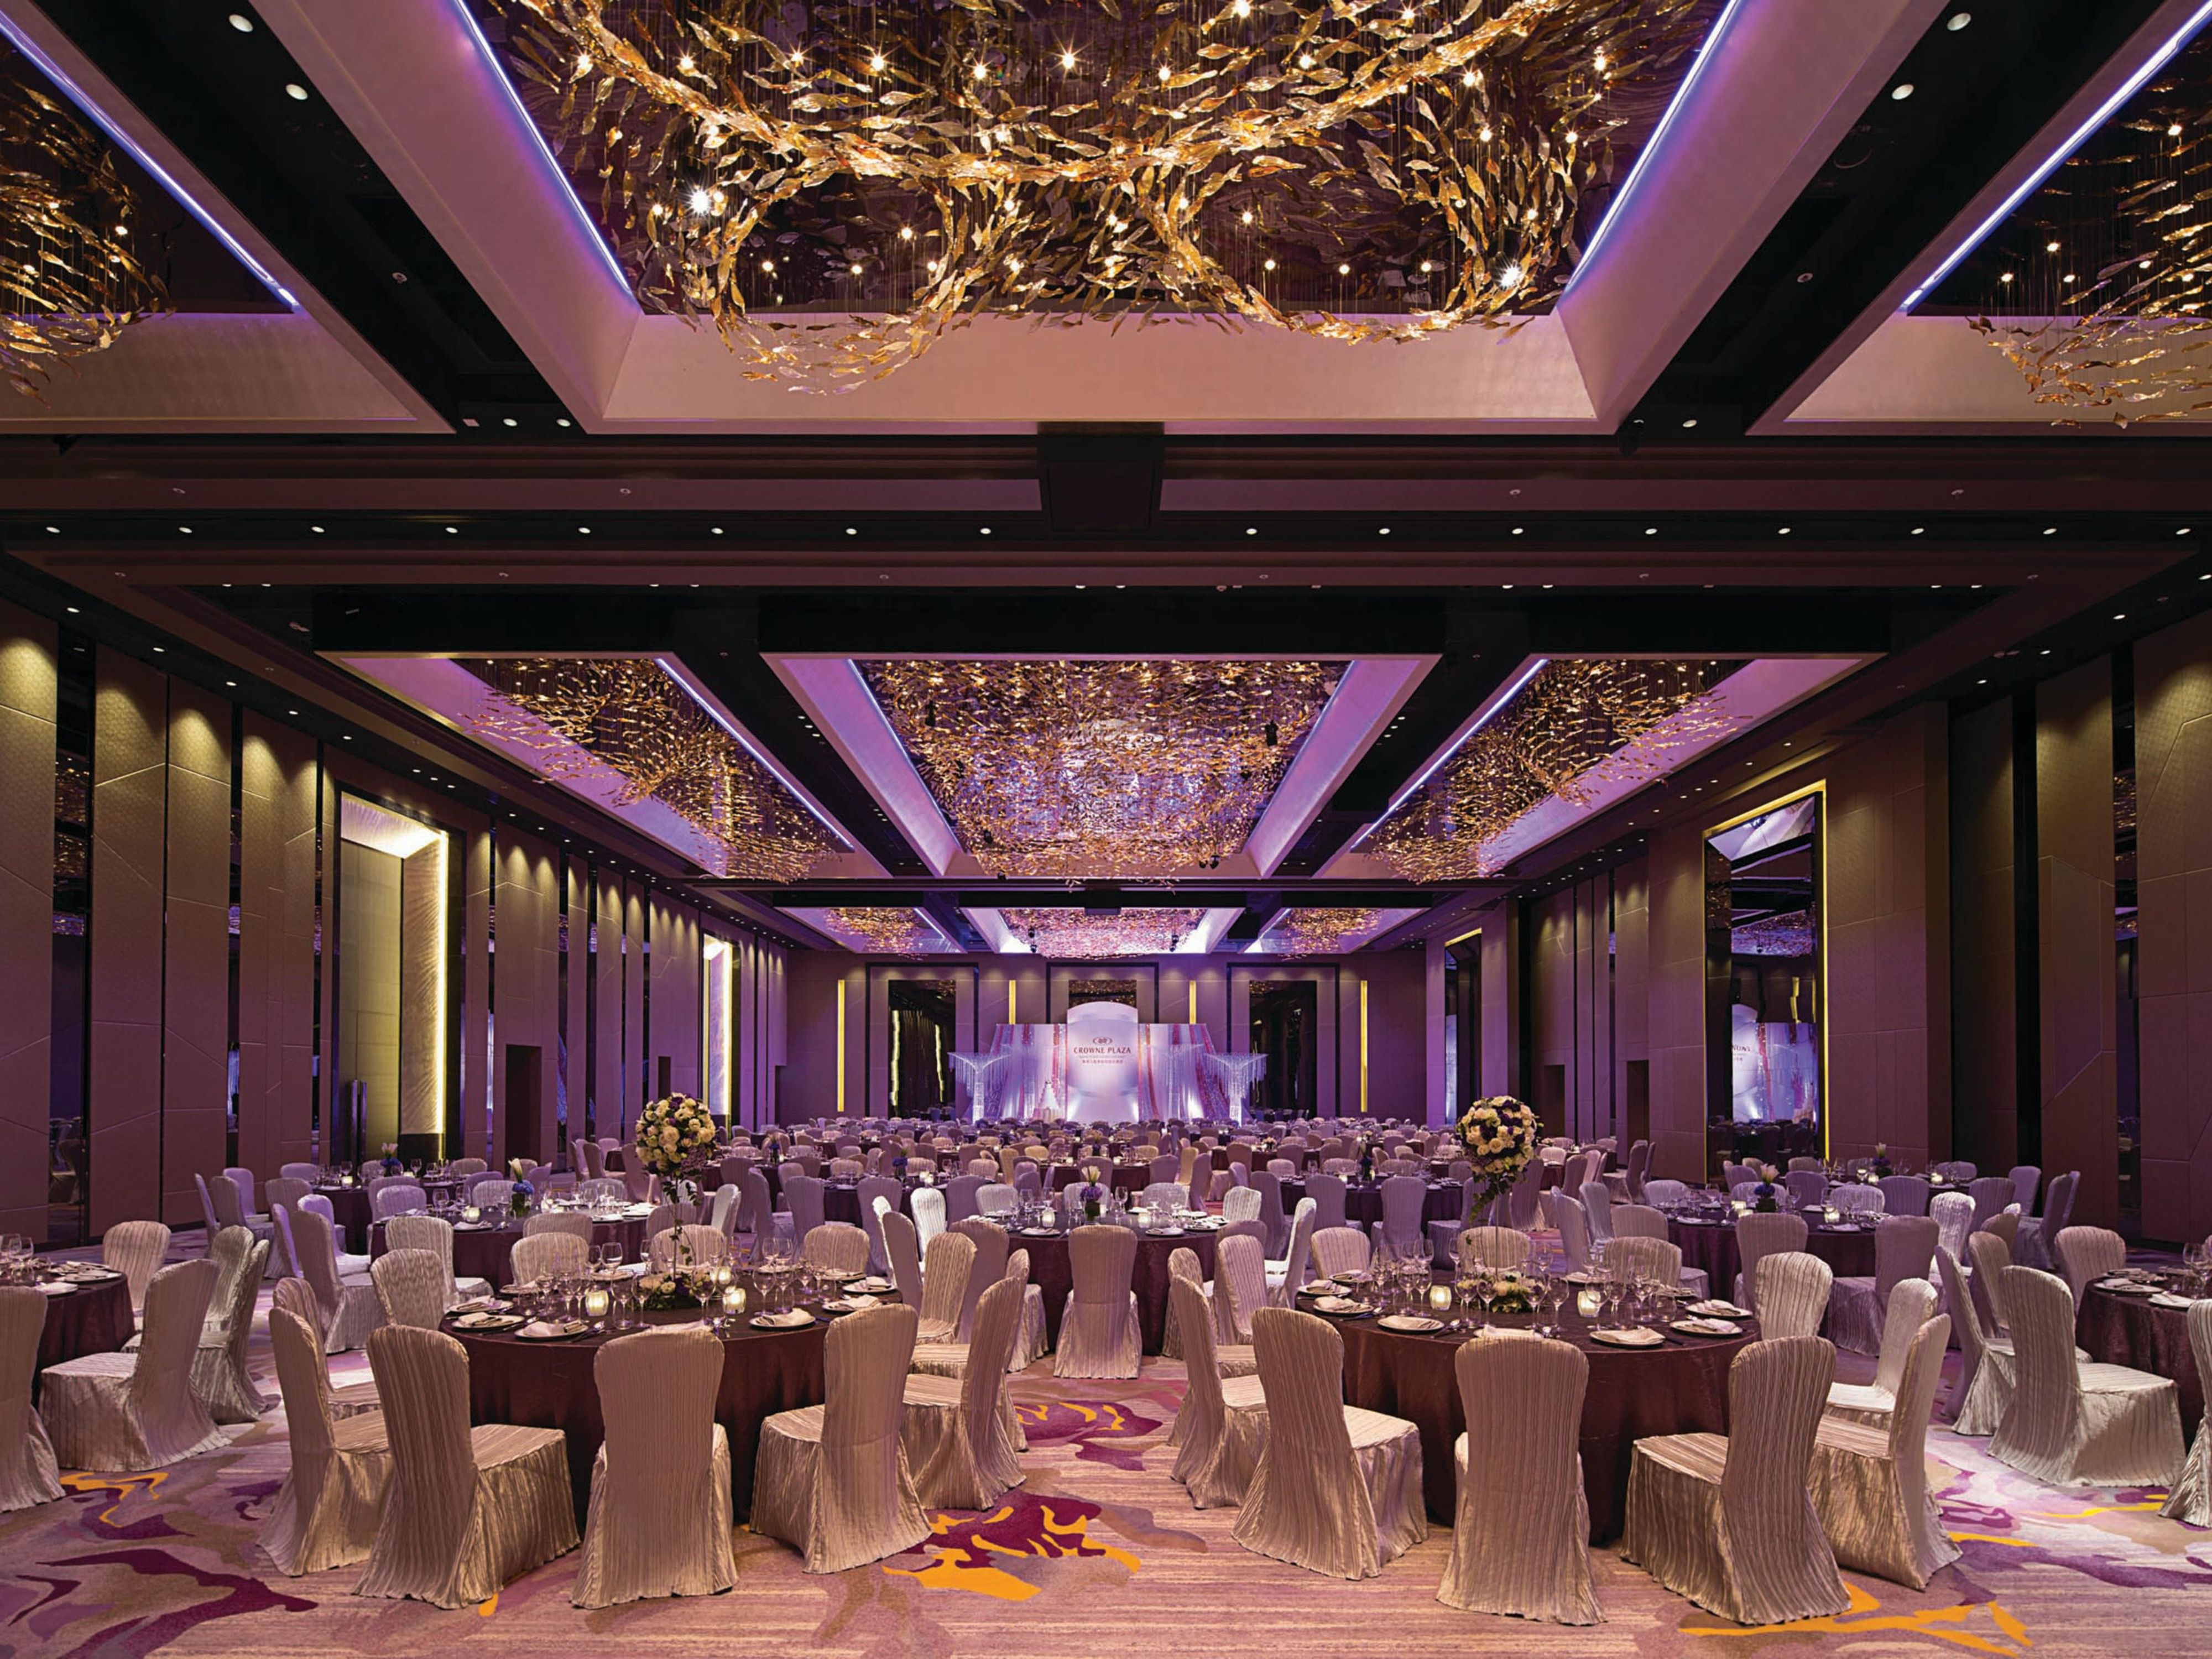 Experience grandeur like never before at our Hong Kong Grand Ballroom - with over 1,000 sq.m of pillar-less space and a towering 6.75m high ceiling, it can accommodate up to 860 guests for a sit-down banquet. Our LED Wall, and pre-function area with floor-to-ceiling windows and outdoor patio ensure an unforgettable event.